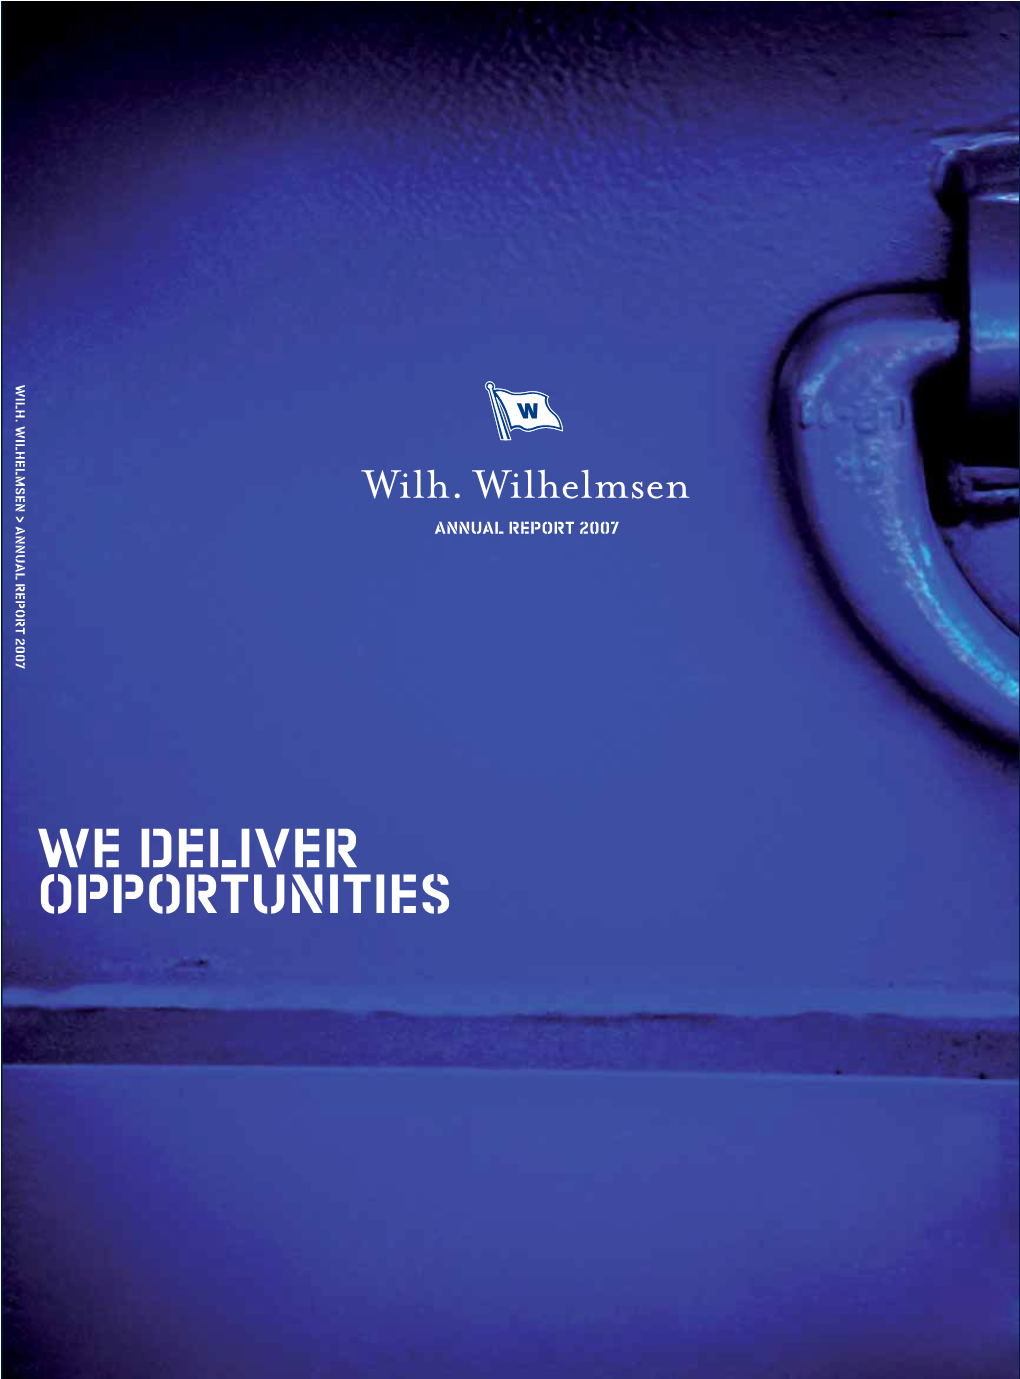 We Deliver Opportunities 160 Vessels in Operating Fleets More Than One Product Delivery Every Three Minutes to a Wessel Worldwide